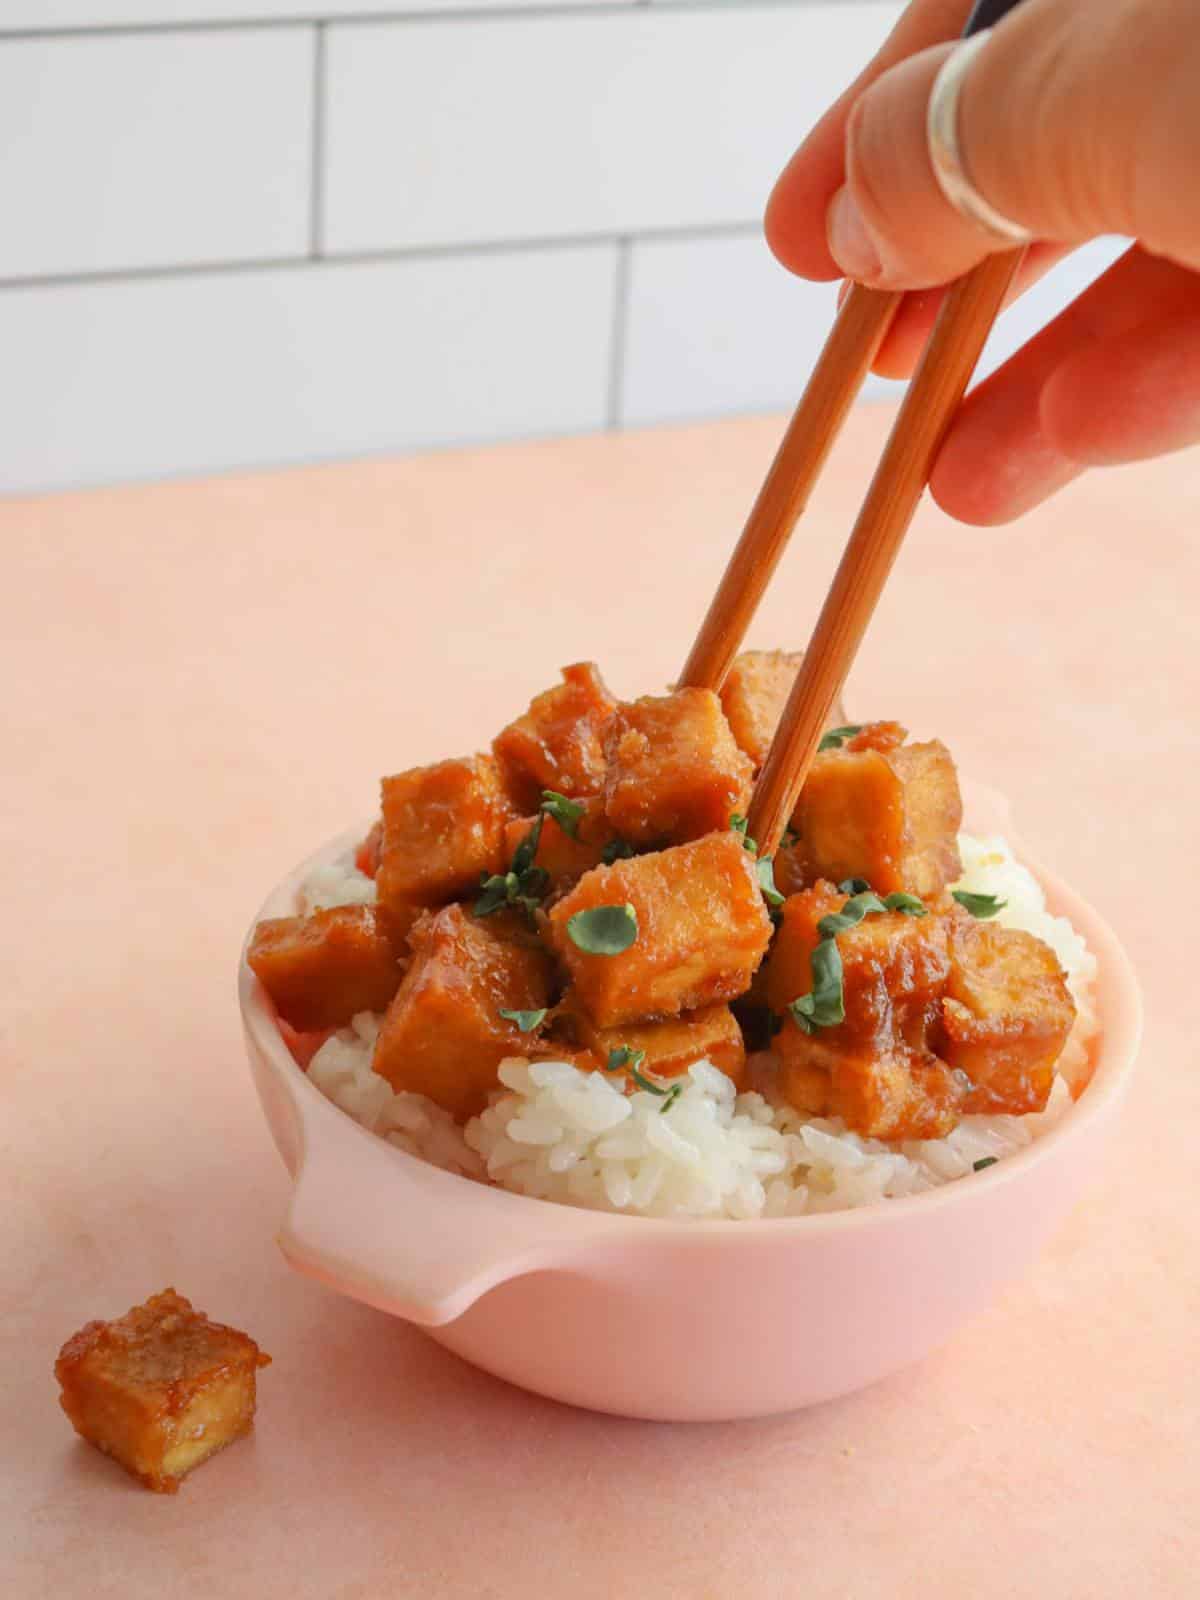 Miso tofu in a bowl with rice and a hand holding chopsticks.